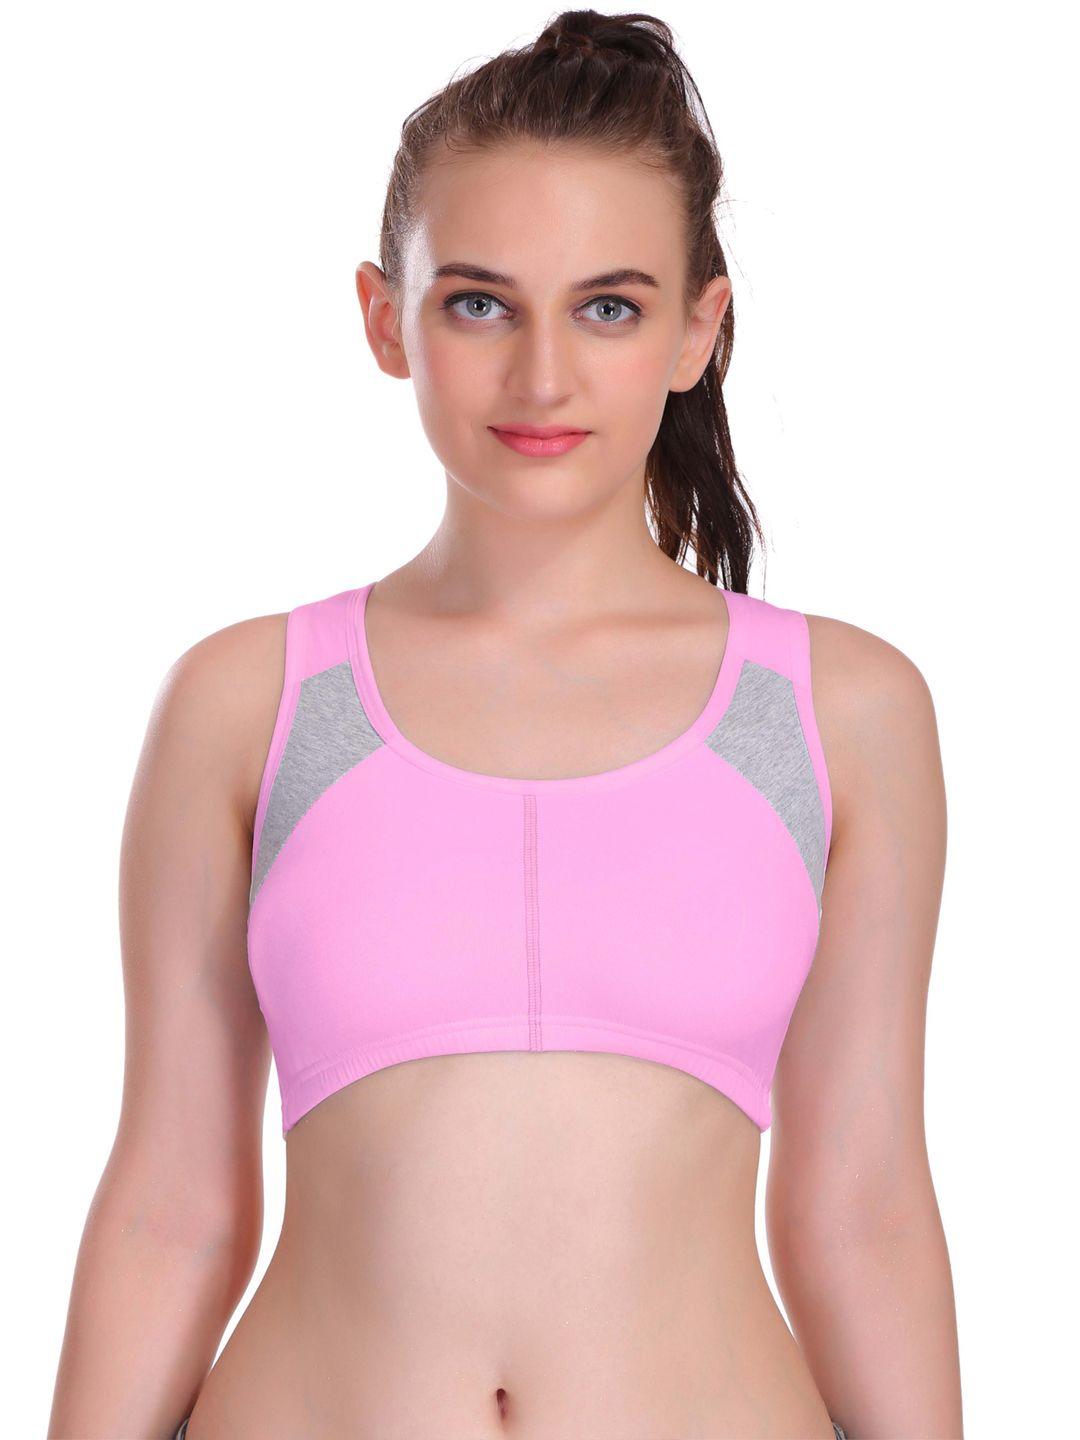 eve's-beauty-colourblocked-full-coverage-bra-with-all-day-comfort